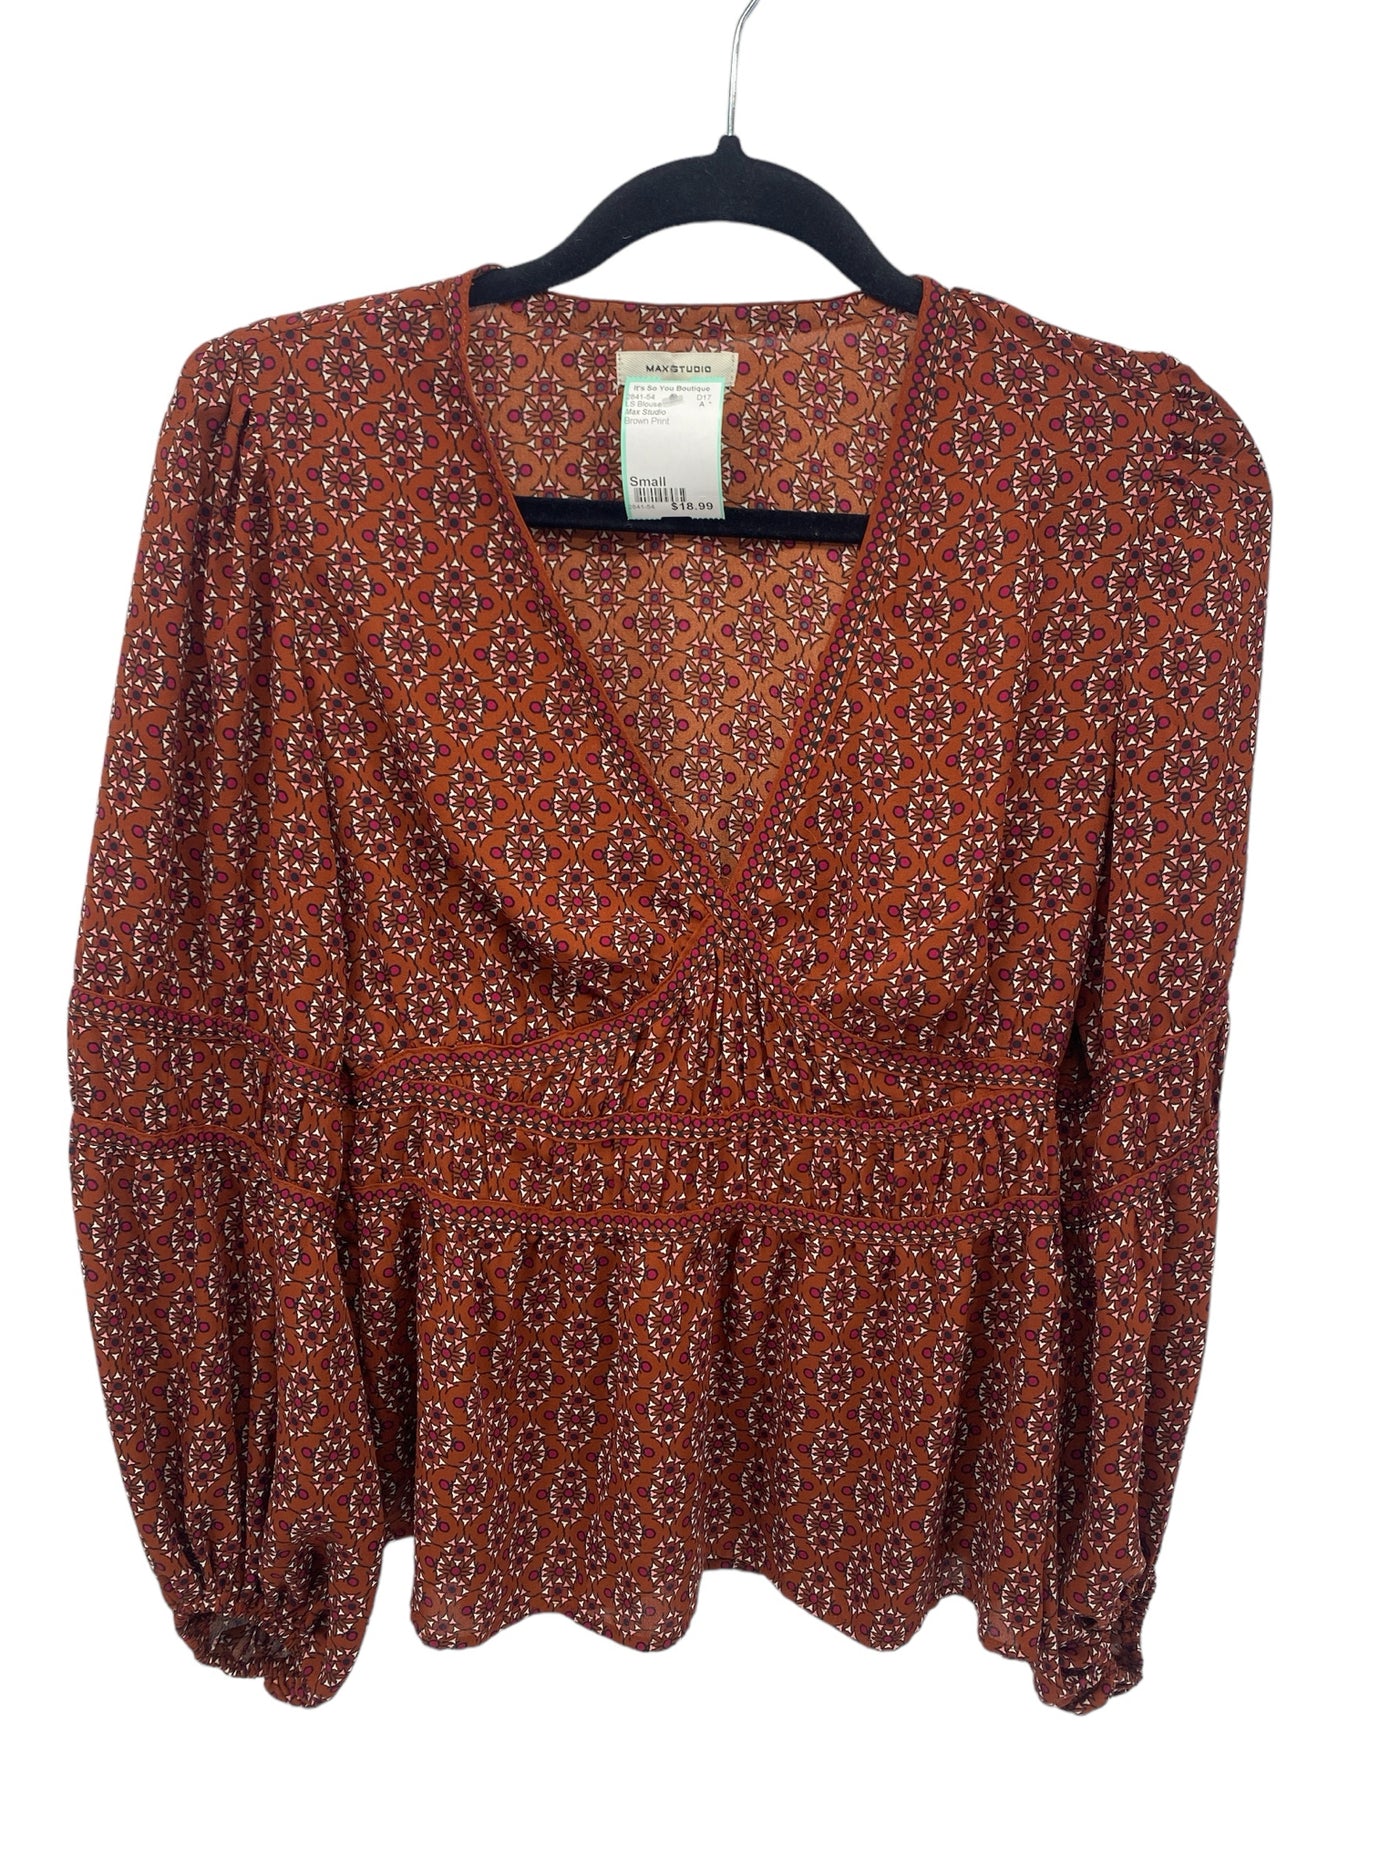 Max Studio Misses Size Small Brown Print LS Blouse